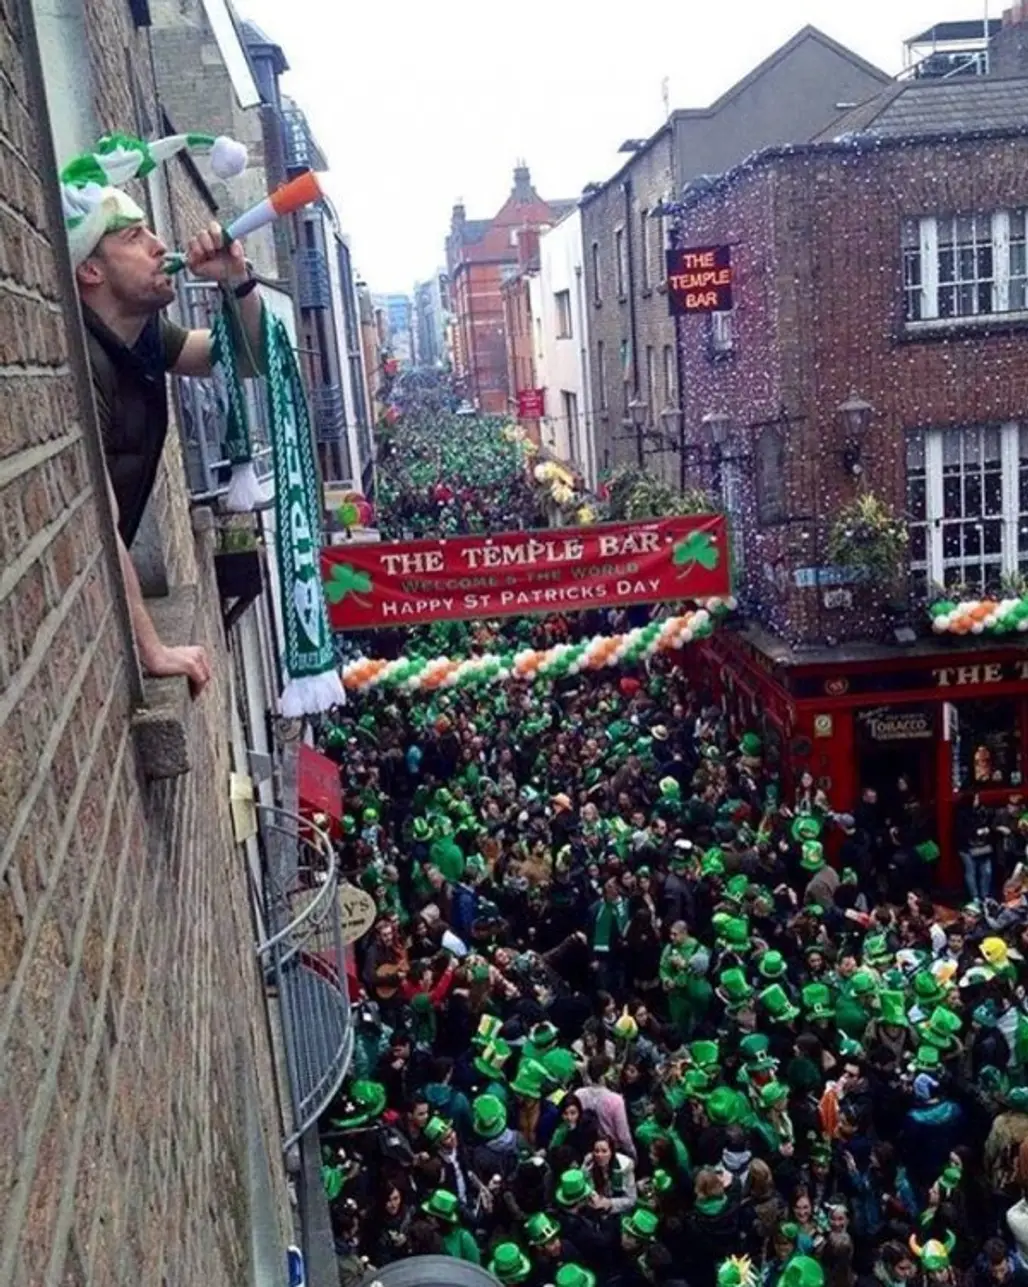 Crowd, Green, People, Saint patrick's day, Event,